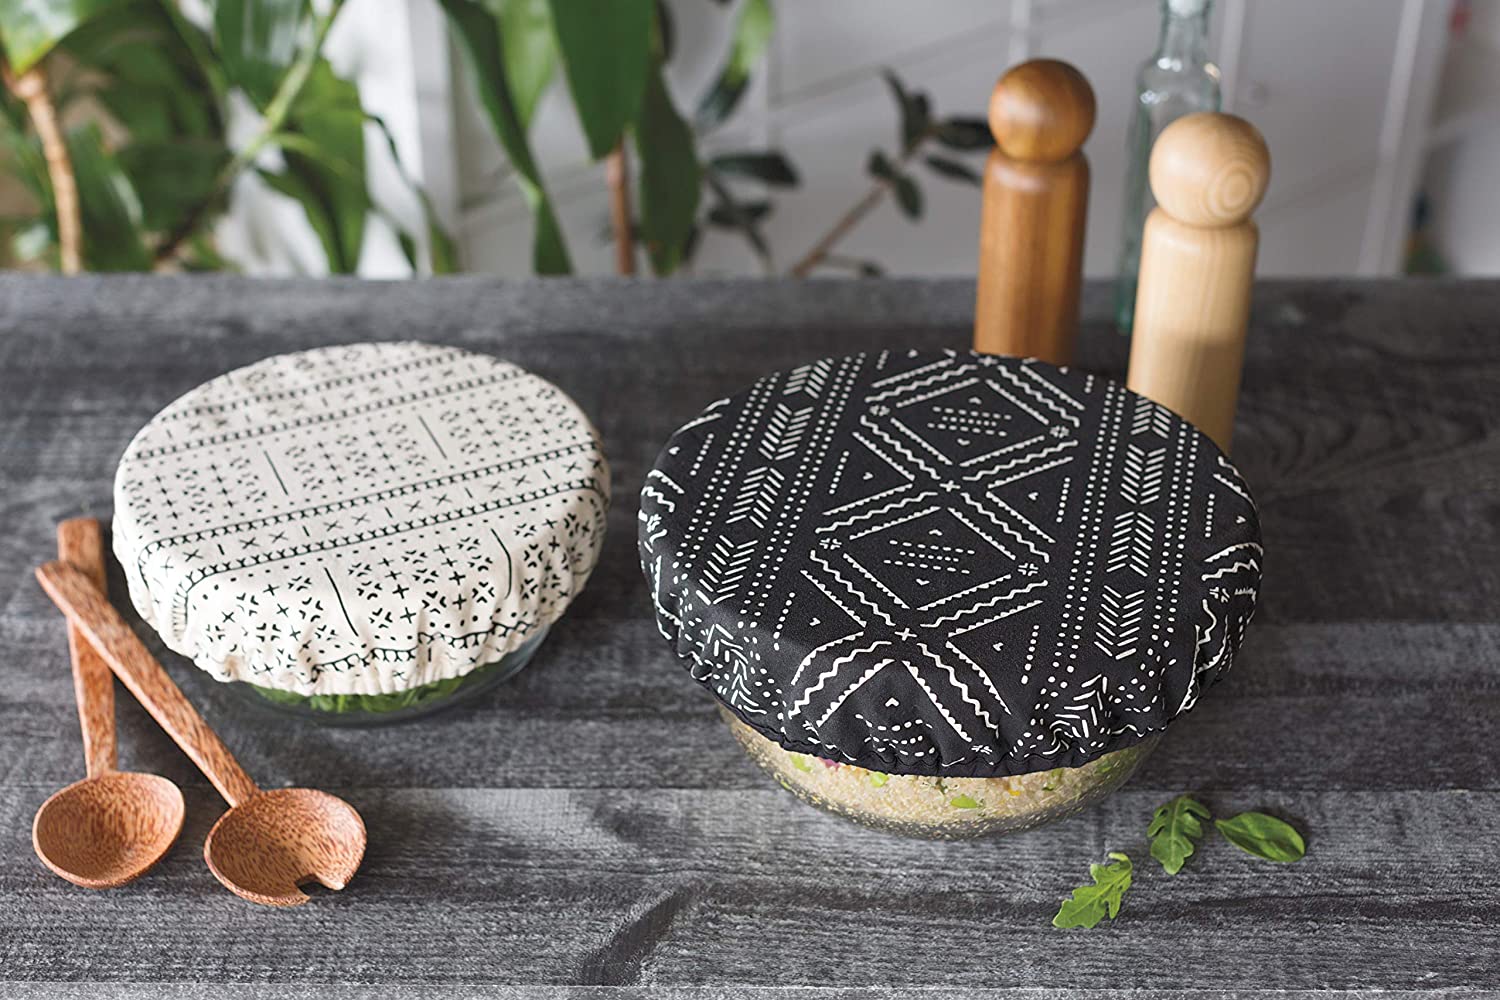 bowl covers on bowls; one black with white design, the other white with black design.